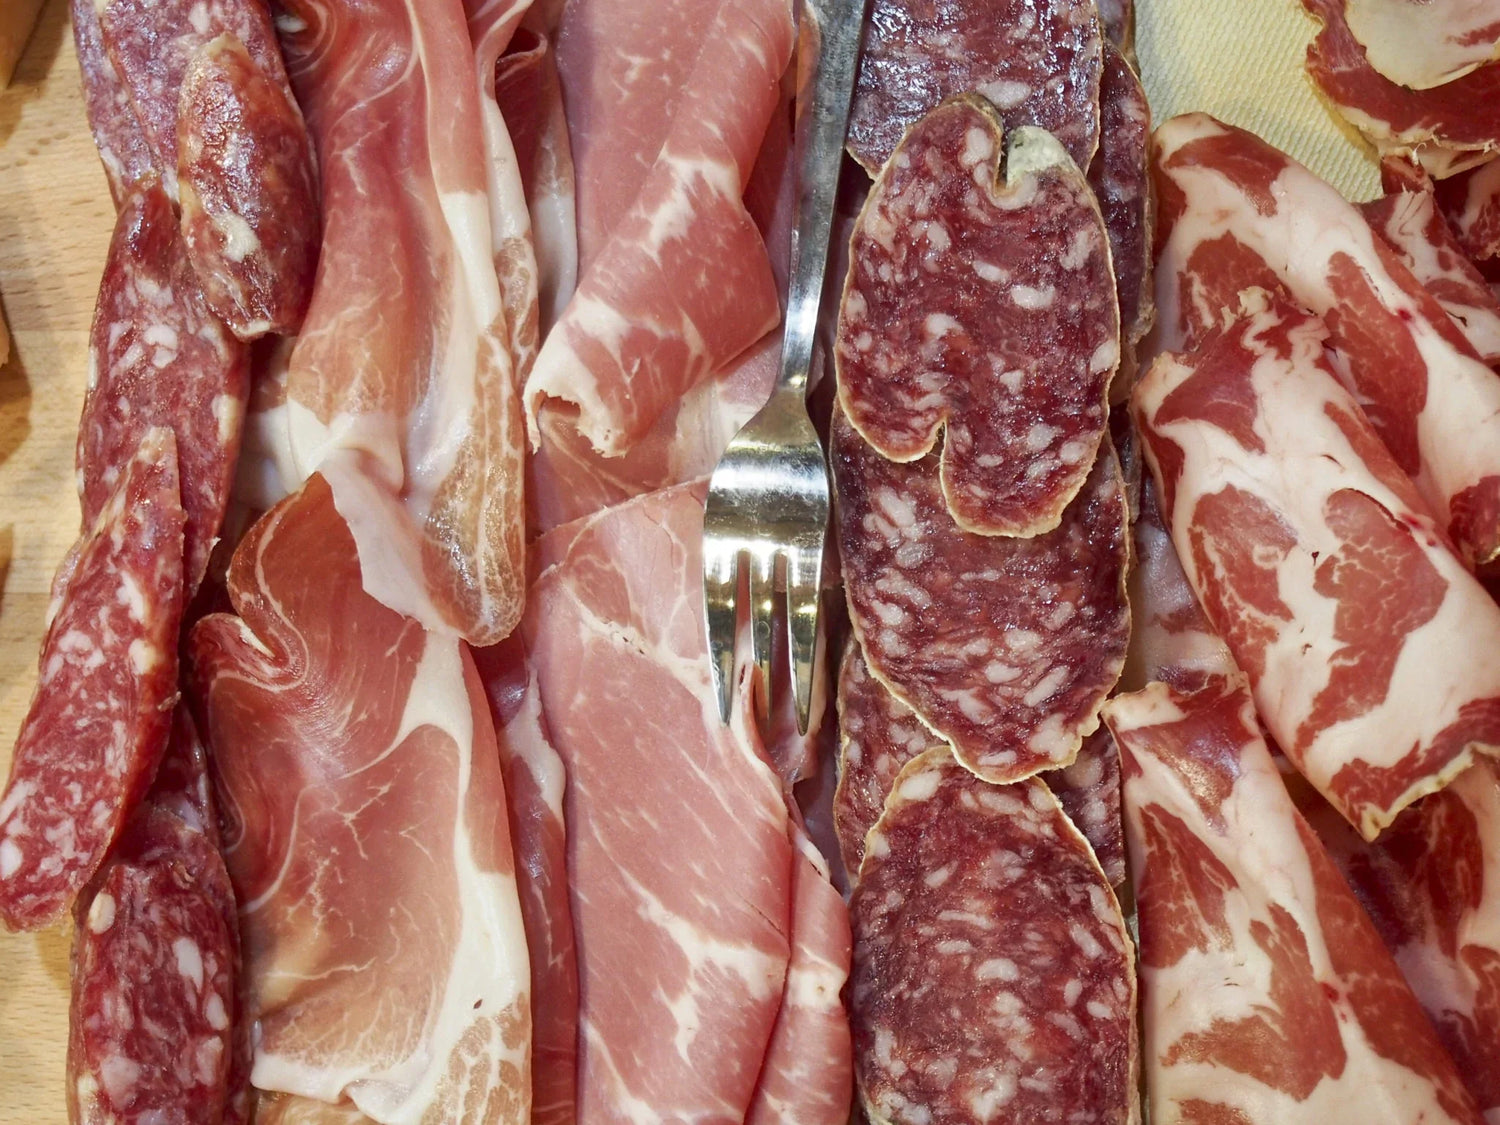 Smoked, Cured, Aged, and Dehydrated Meat: What's The Difference?